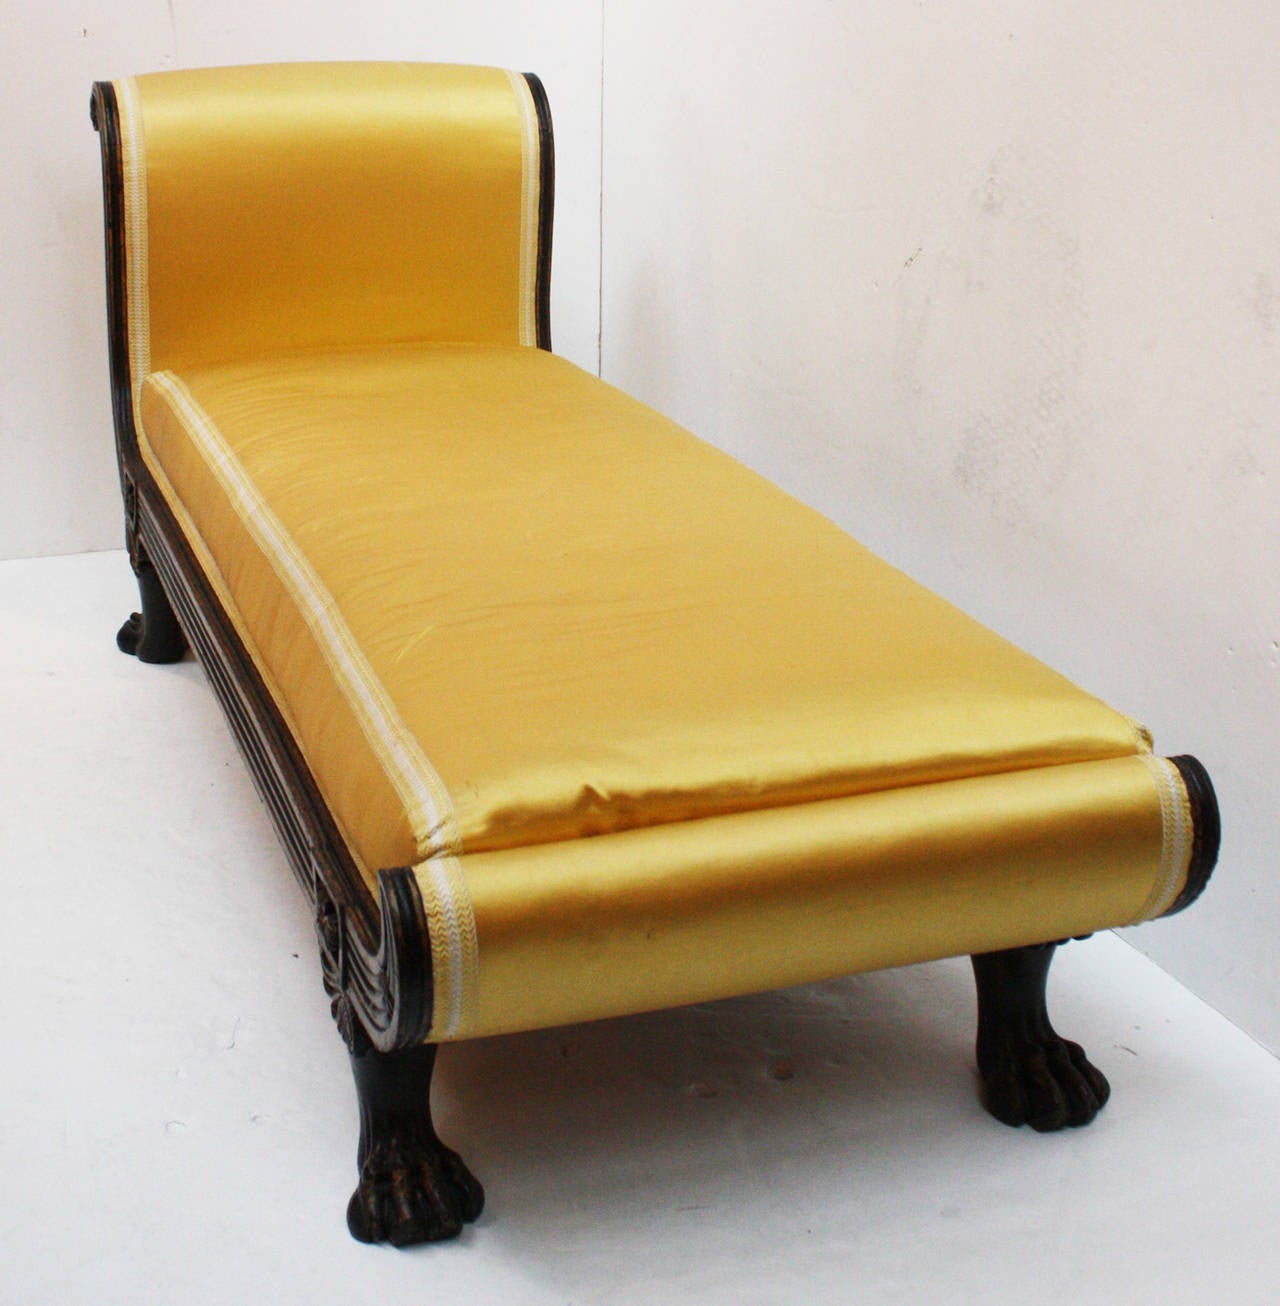 an English Regency Recamier in the manner of Thomas Hope, Regency decorator and patron, black and gilt painted frame with  lion's paw feet, upholstered in pale yellow silk with loose cushion and bolster